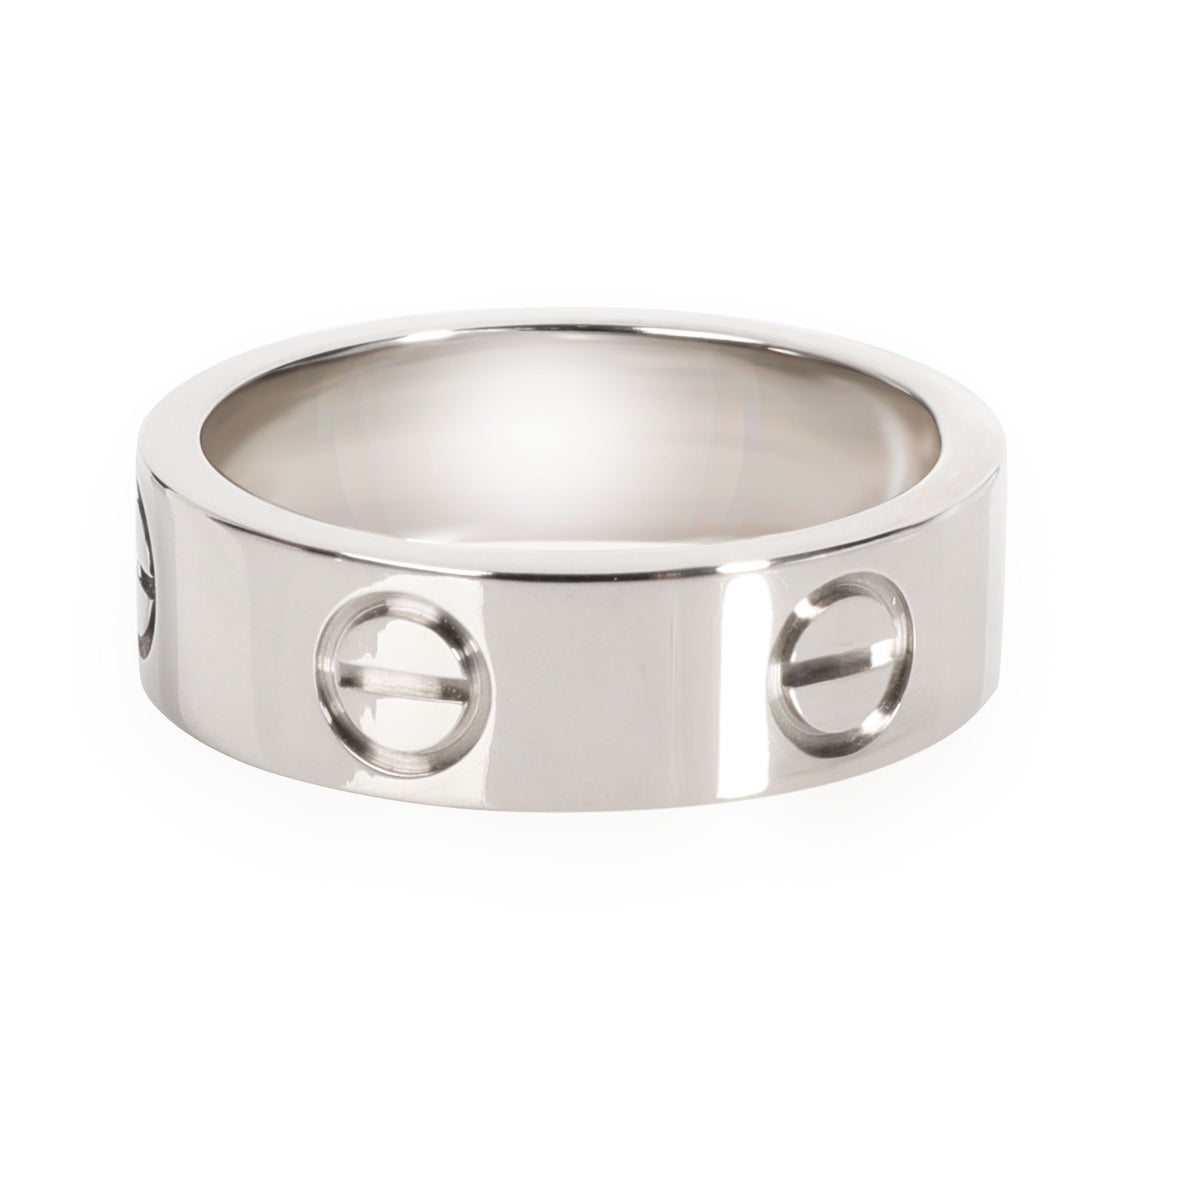 Cartier LOVE Ring in 18K White Gold